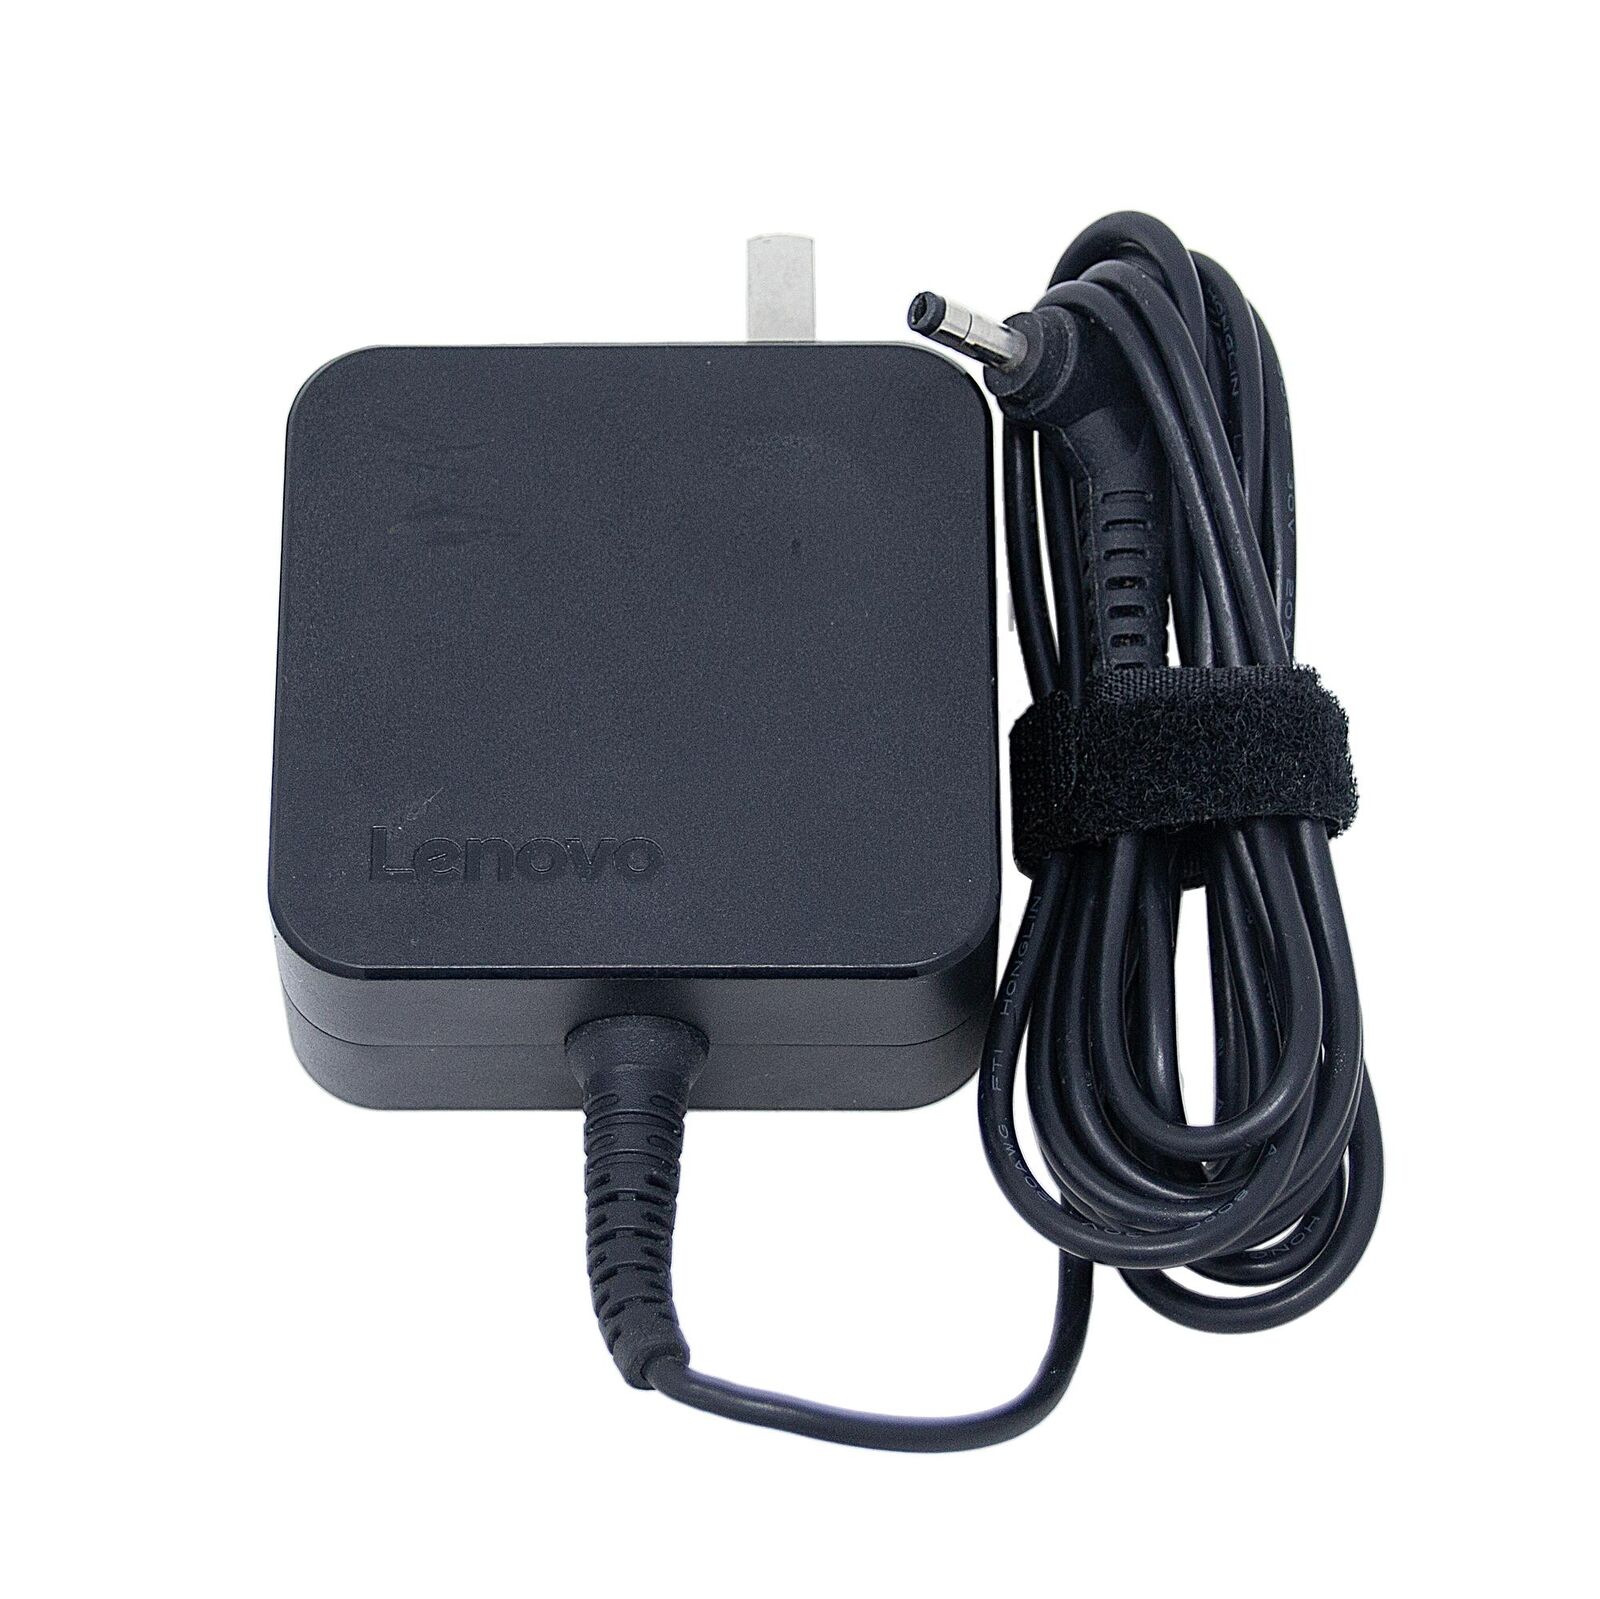 LENOVO IdeaPad 110-15ISK 80UD Genuine Original AC Power Adapter Charger